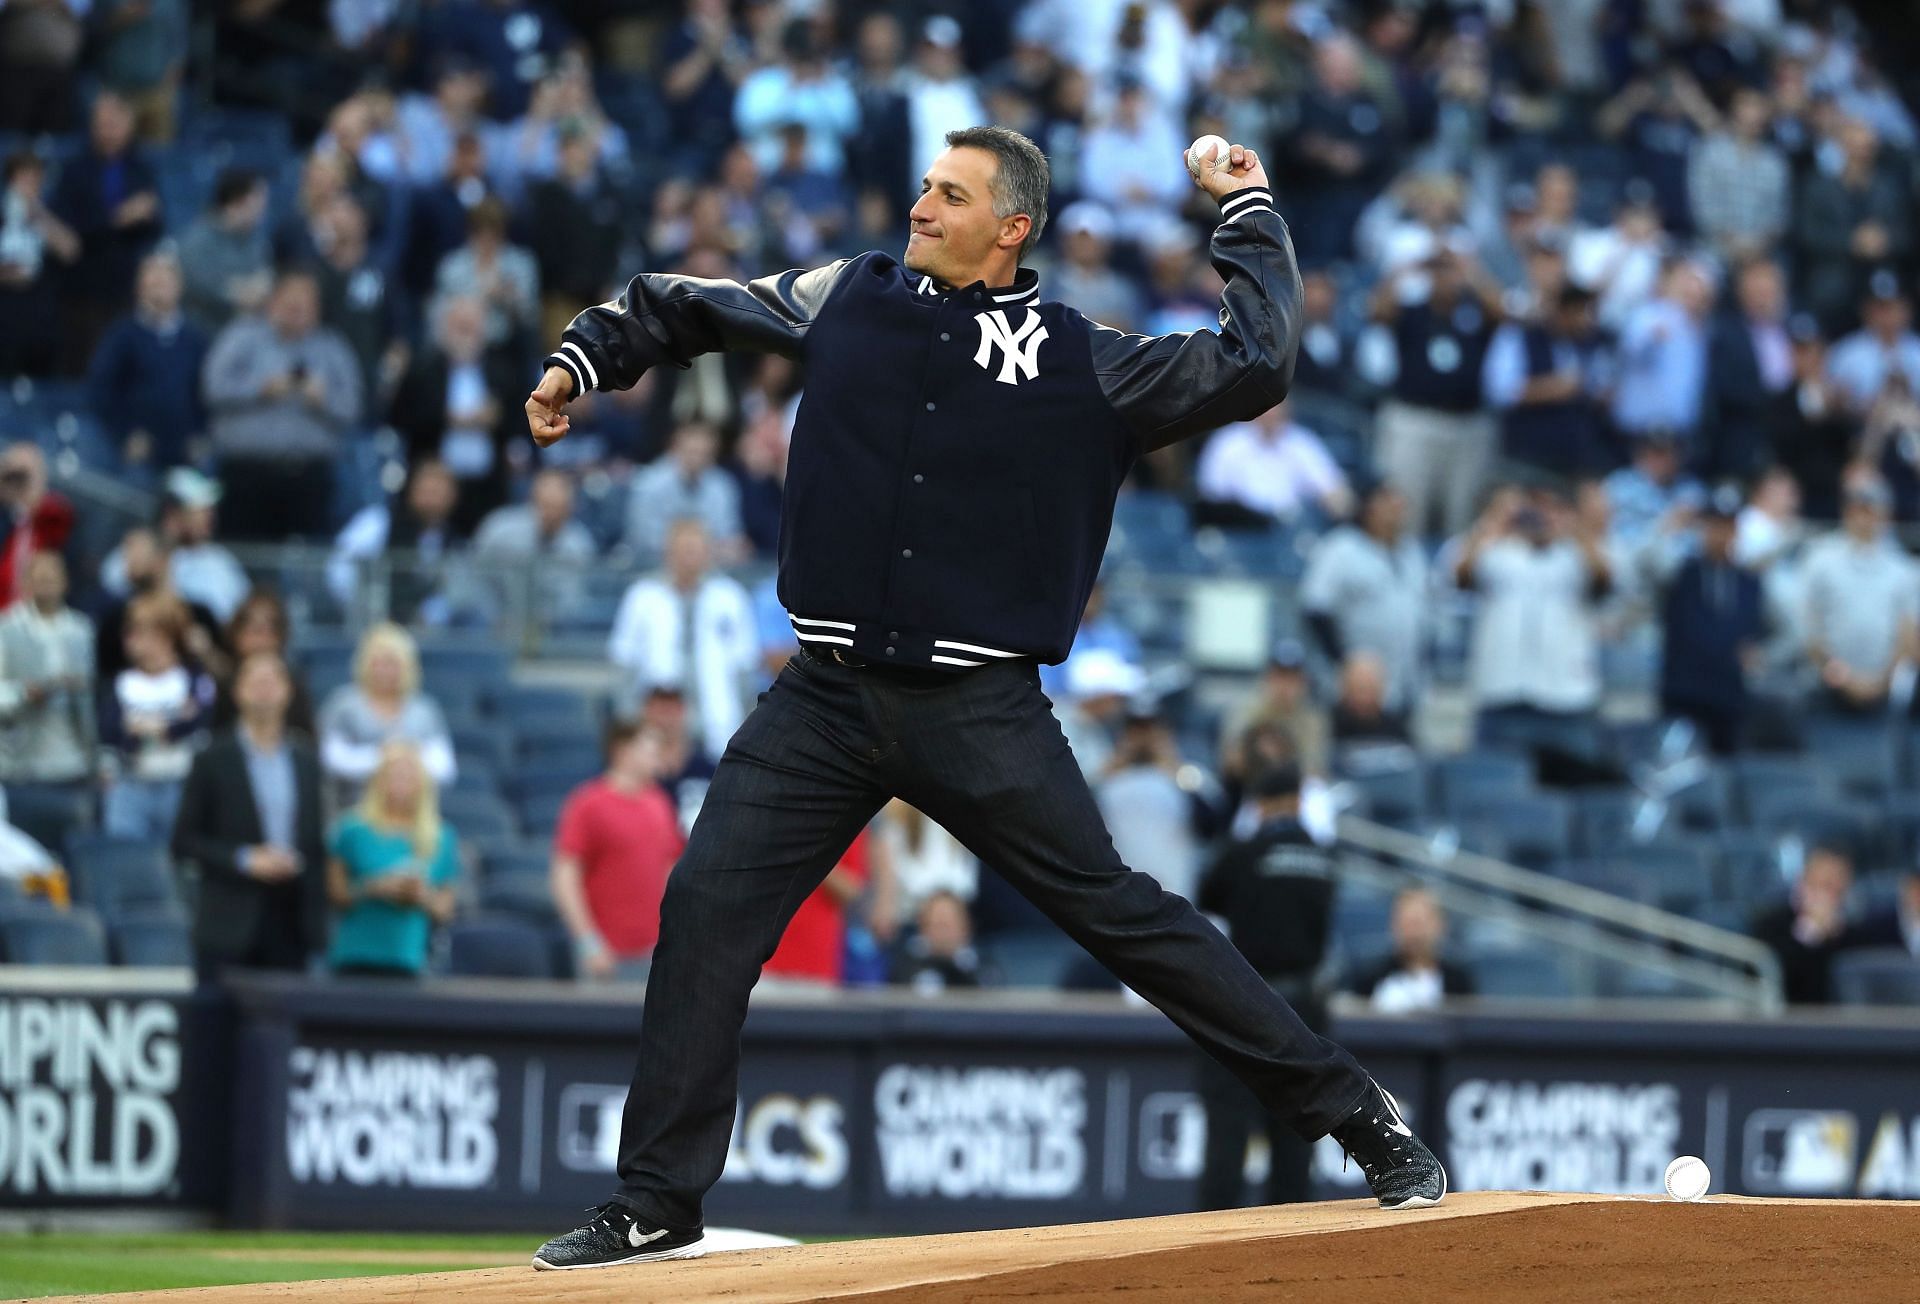 Andy Pettitte throws the first pitch